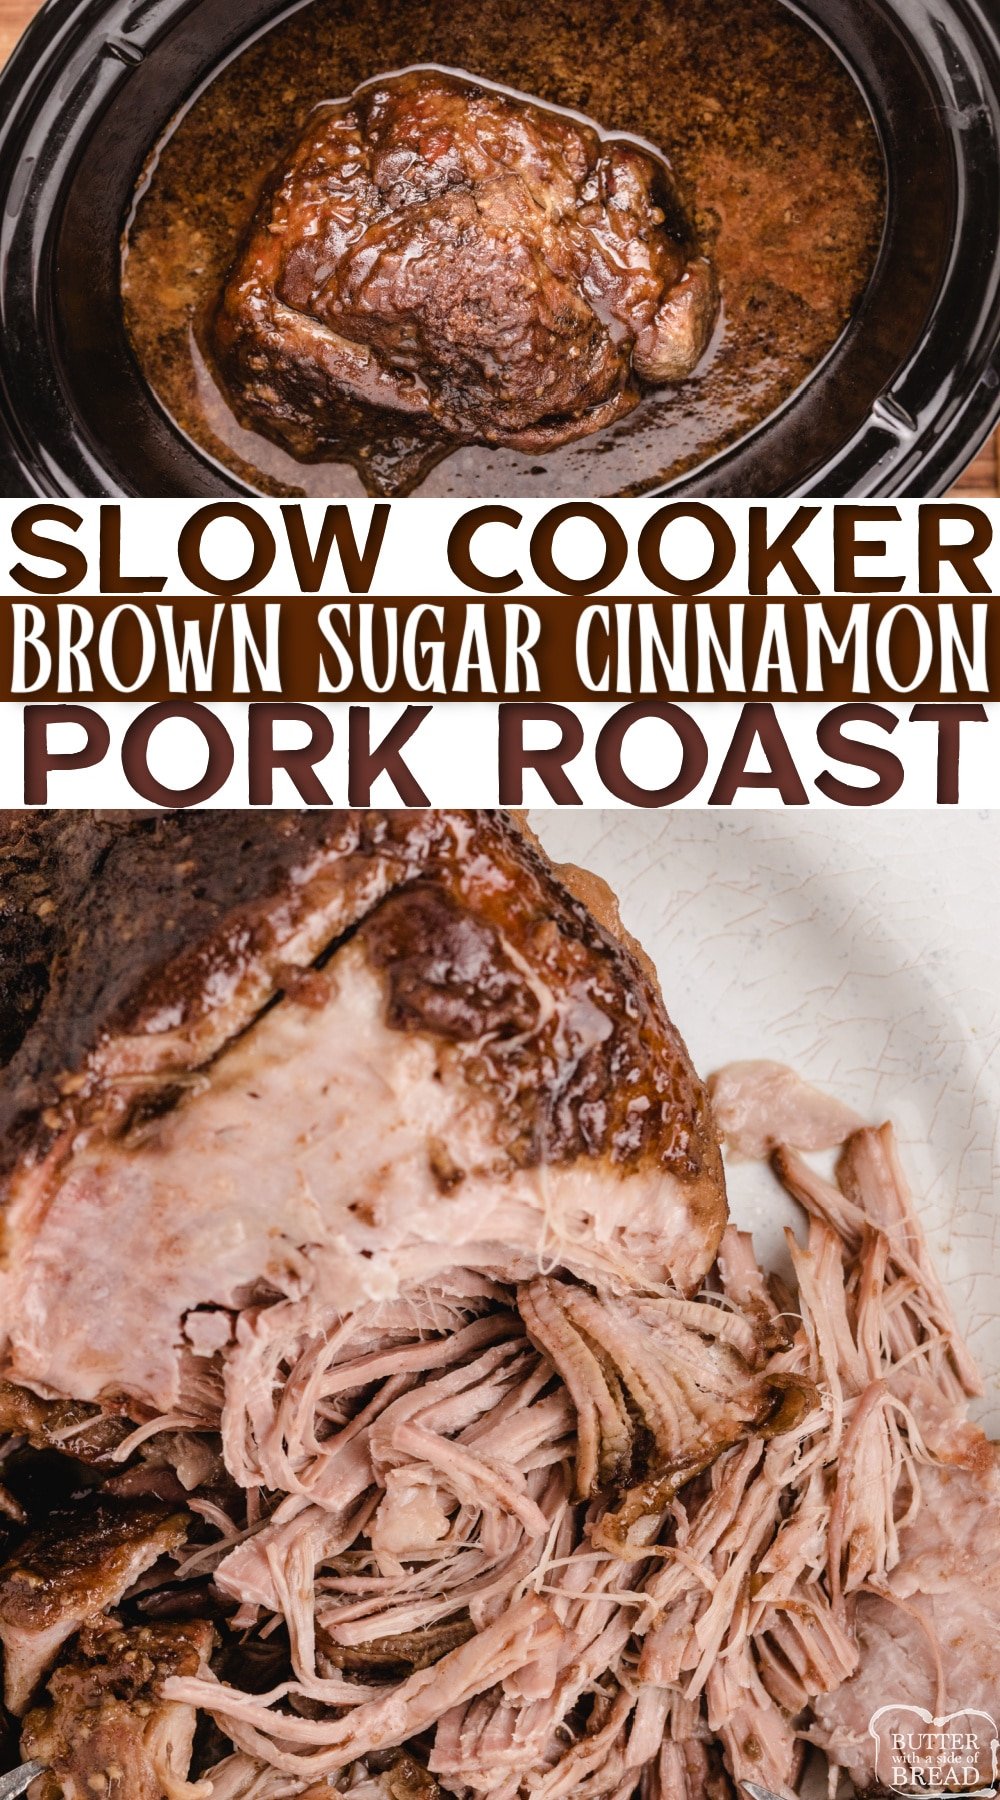 Slow Cooker Brown Sugar Cinnamon Pork Roast made in the crockpot with just a few simple ingredients. Fall-apart tender pork with the most amazing flavors. Instant Pot instructions included!